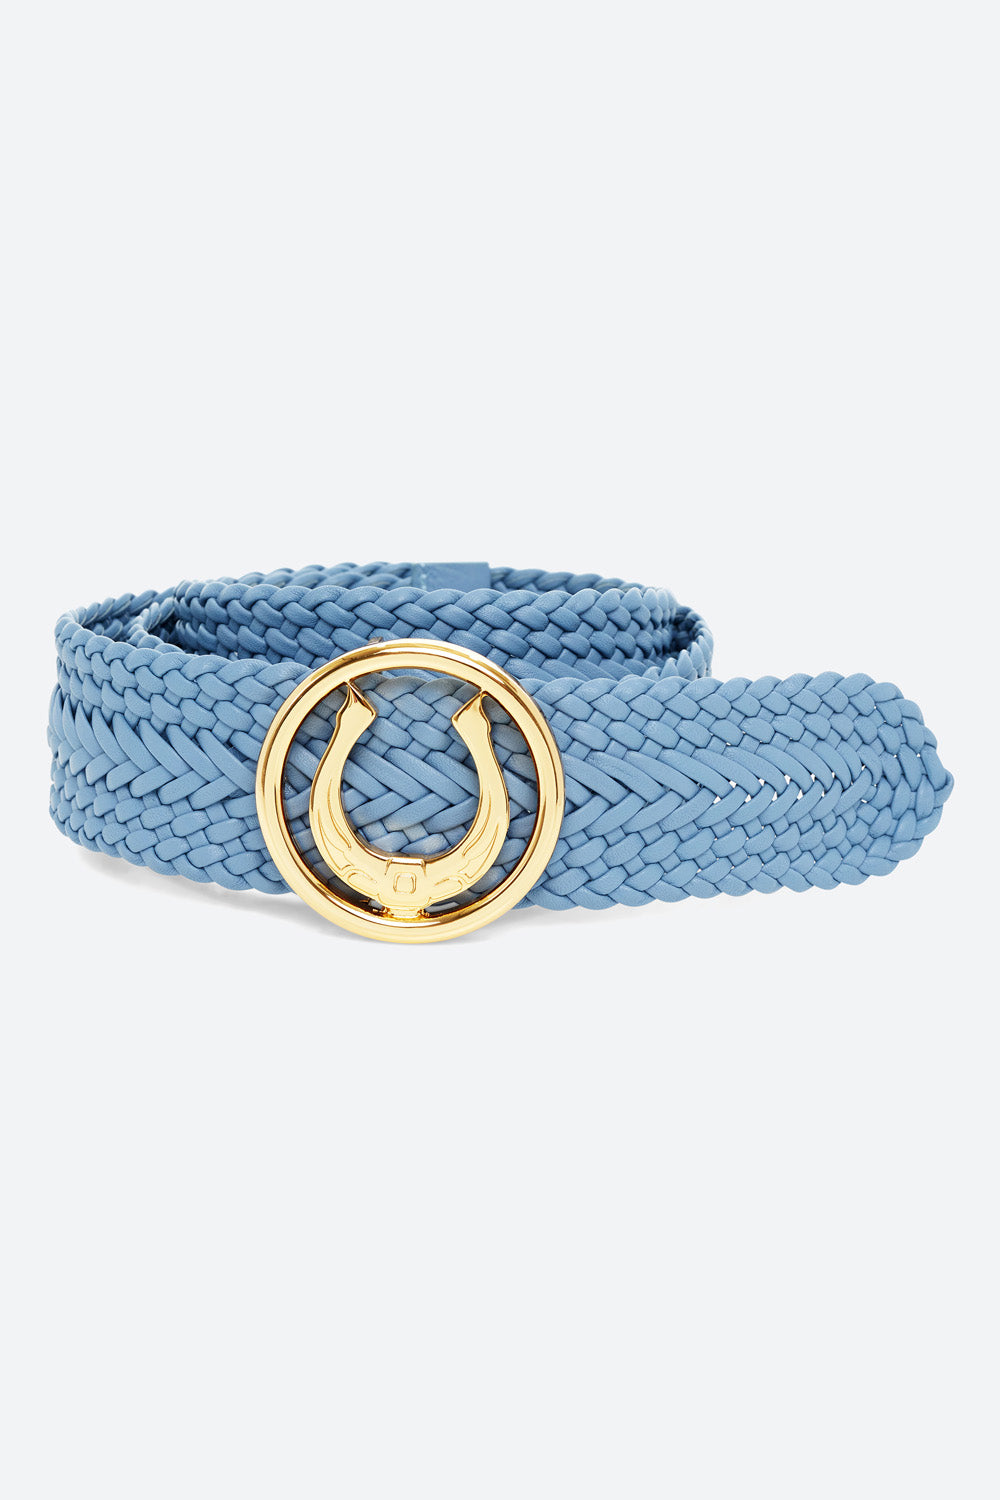 Men's Lucky Belt in Baby Blue, Polished Gold-toned Horseshoe Buckle